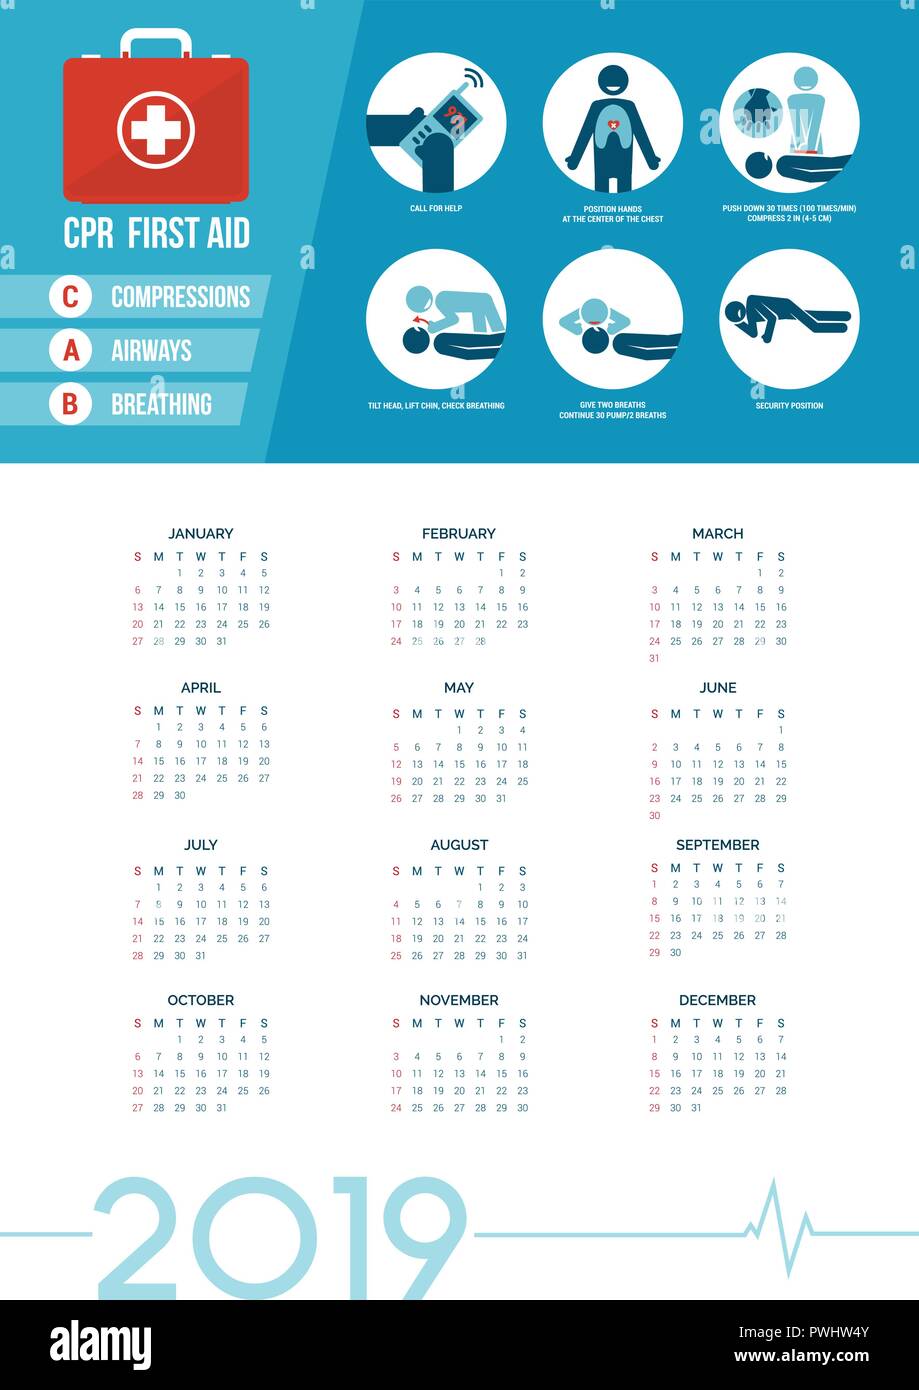 CPR and first aid kit calendar 2019 with medical supplies for emergencies, healthcare concept Stock Vector